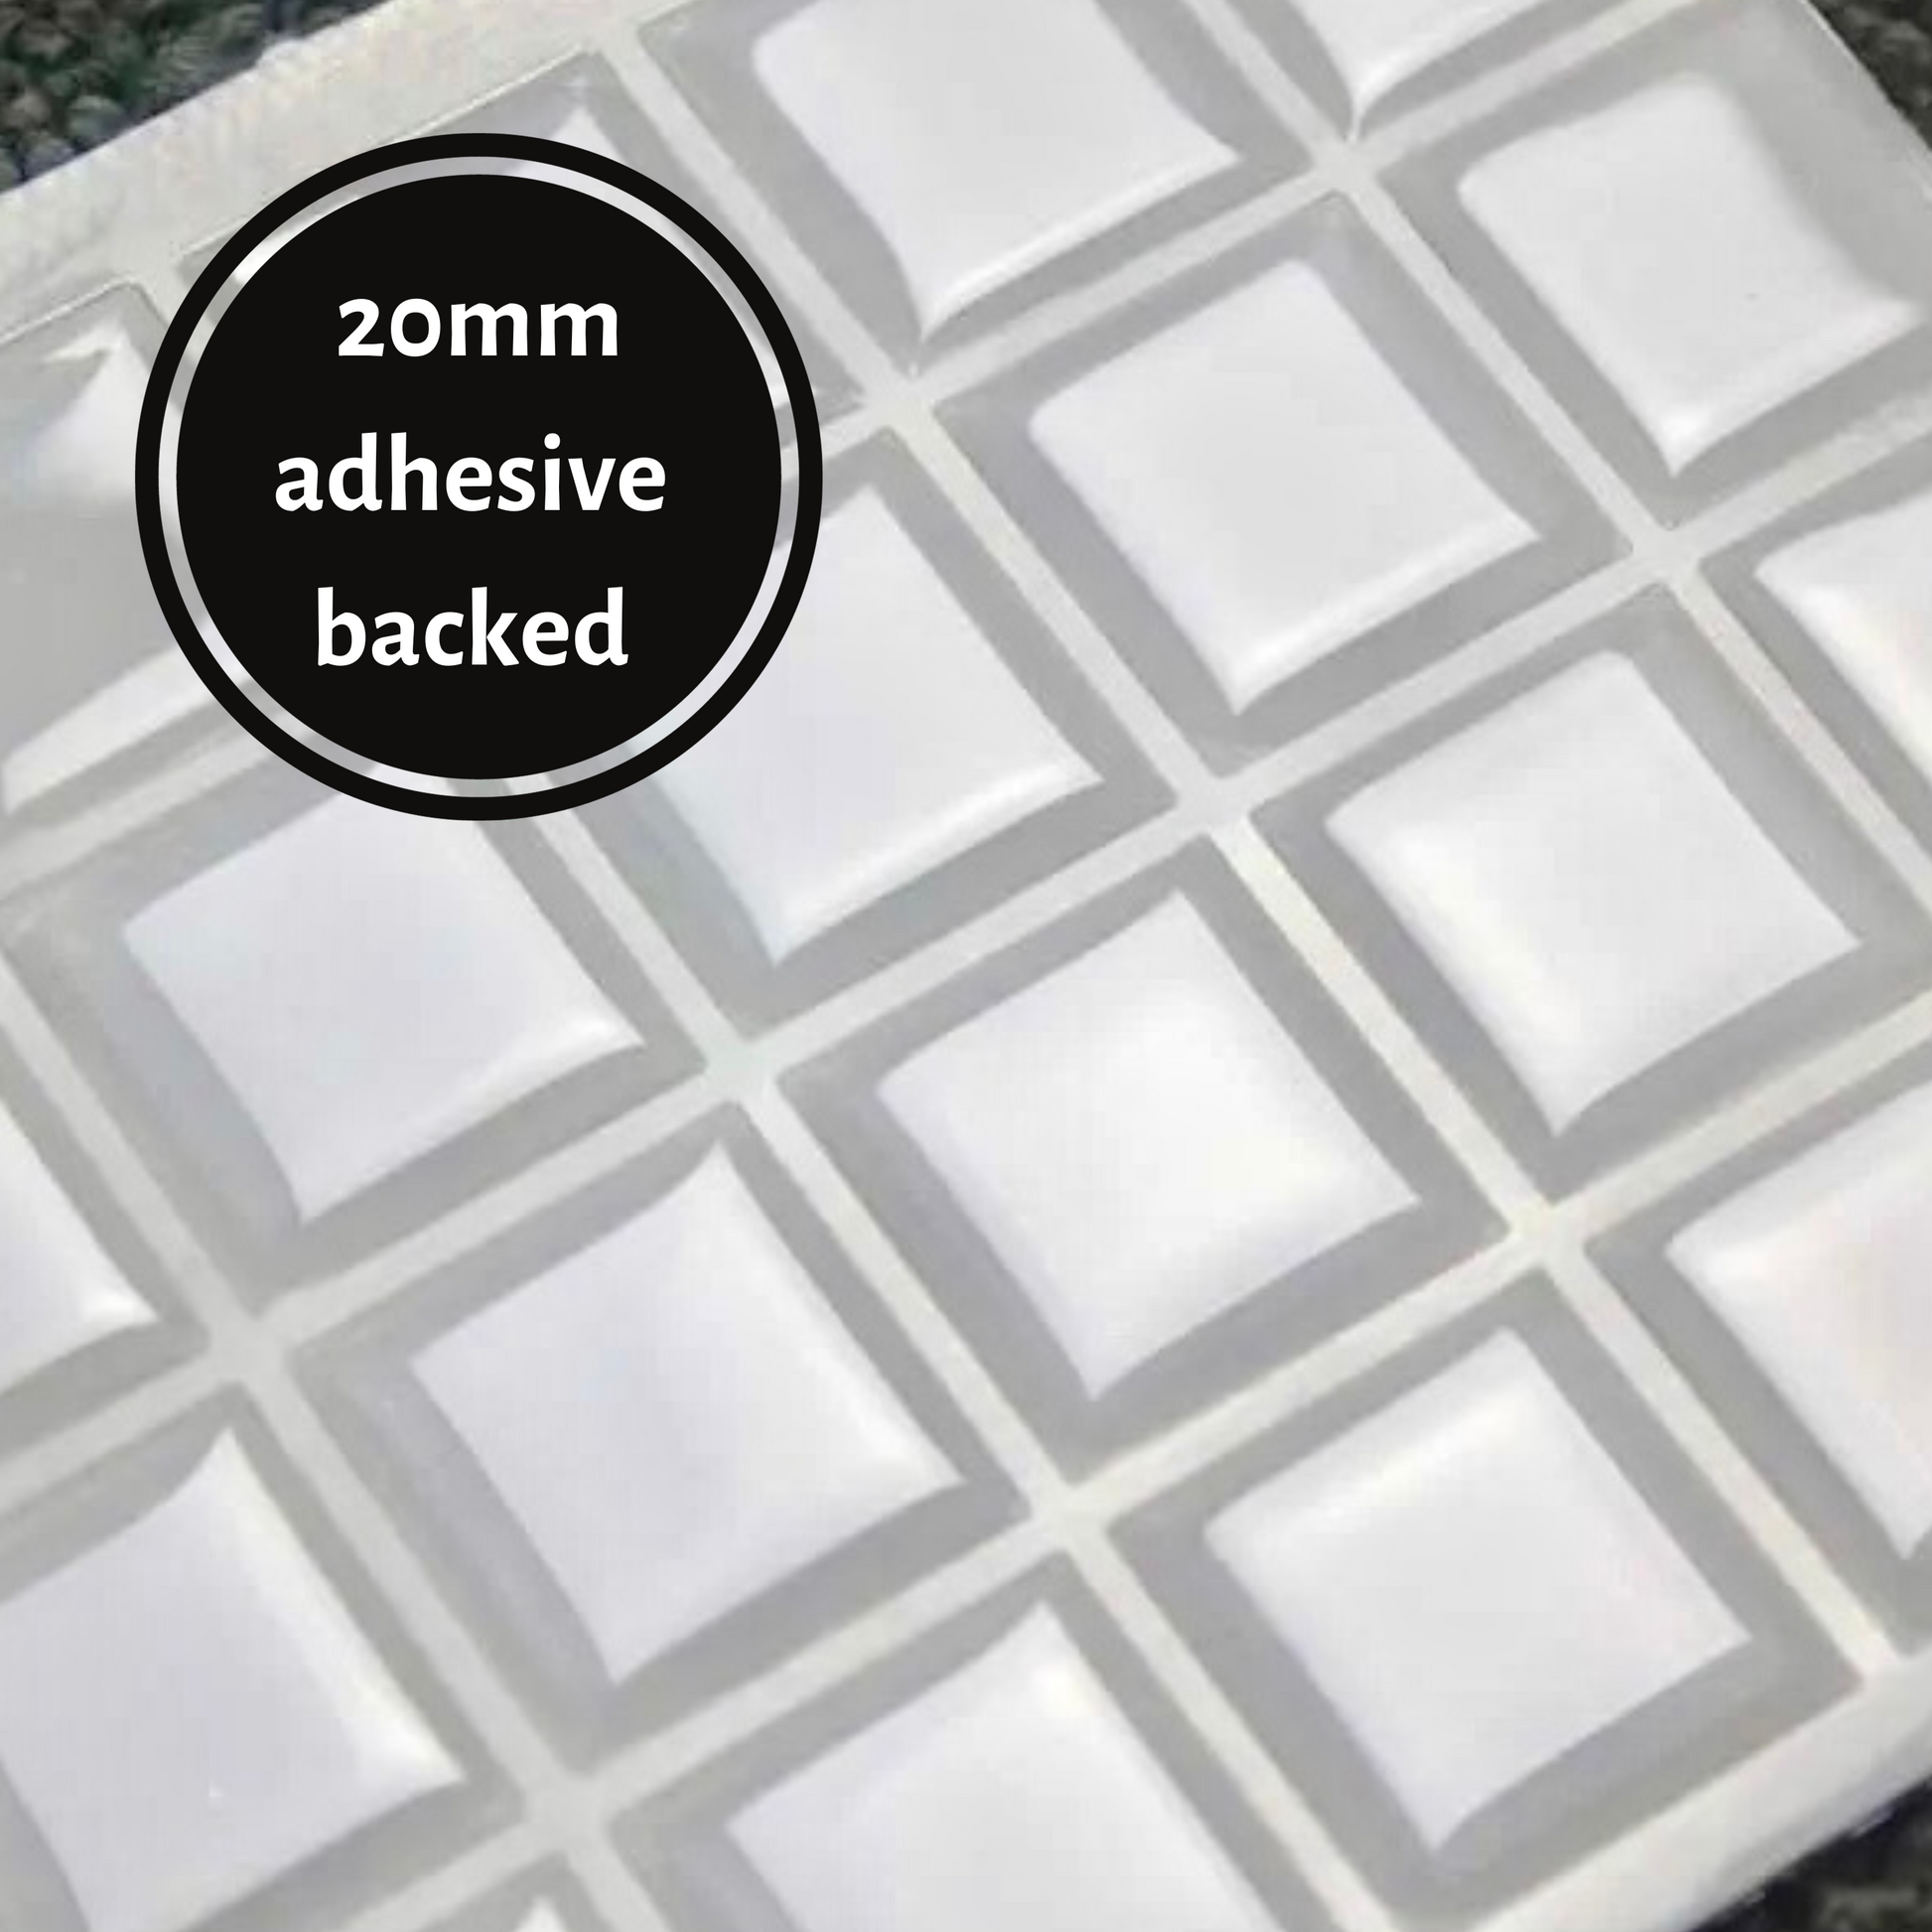 20mm Square Covers Epoxy Photo Cover & Adhesive